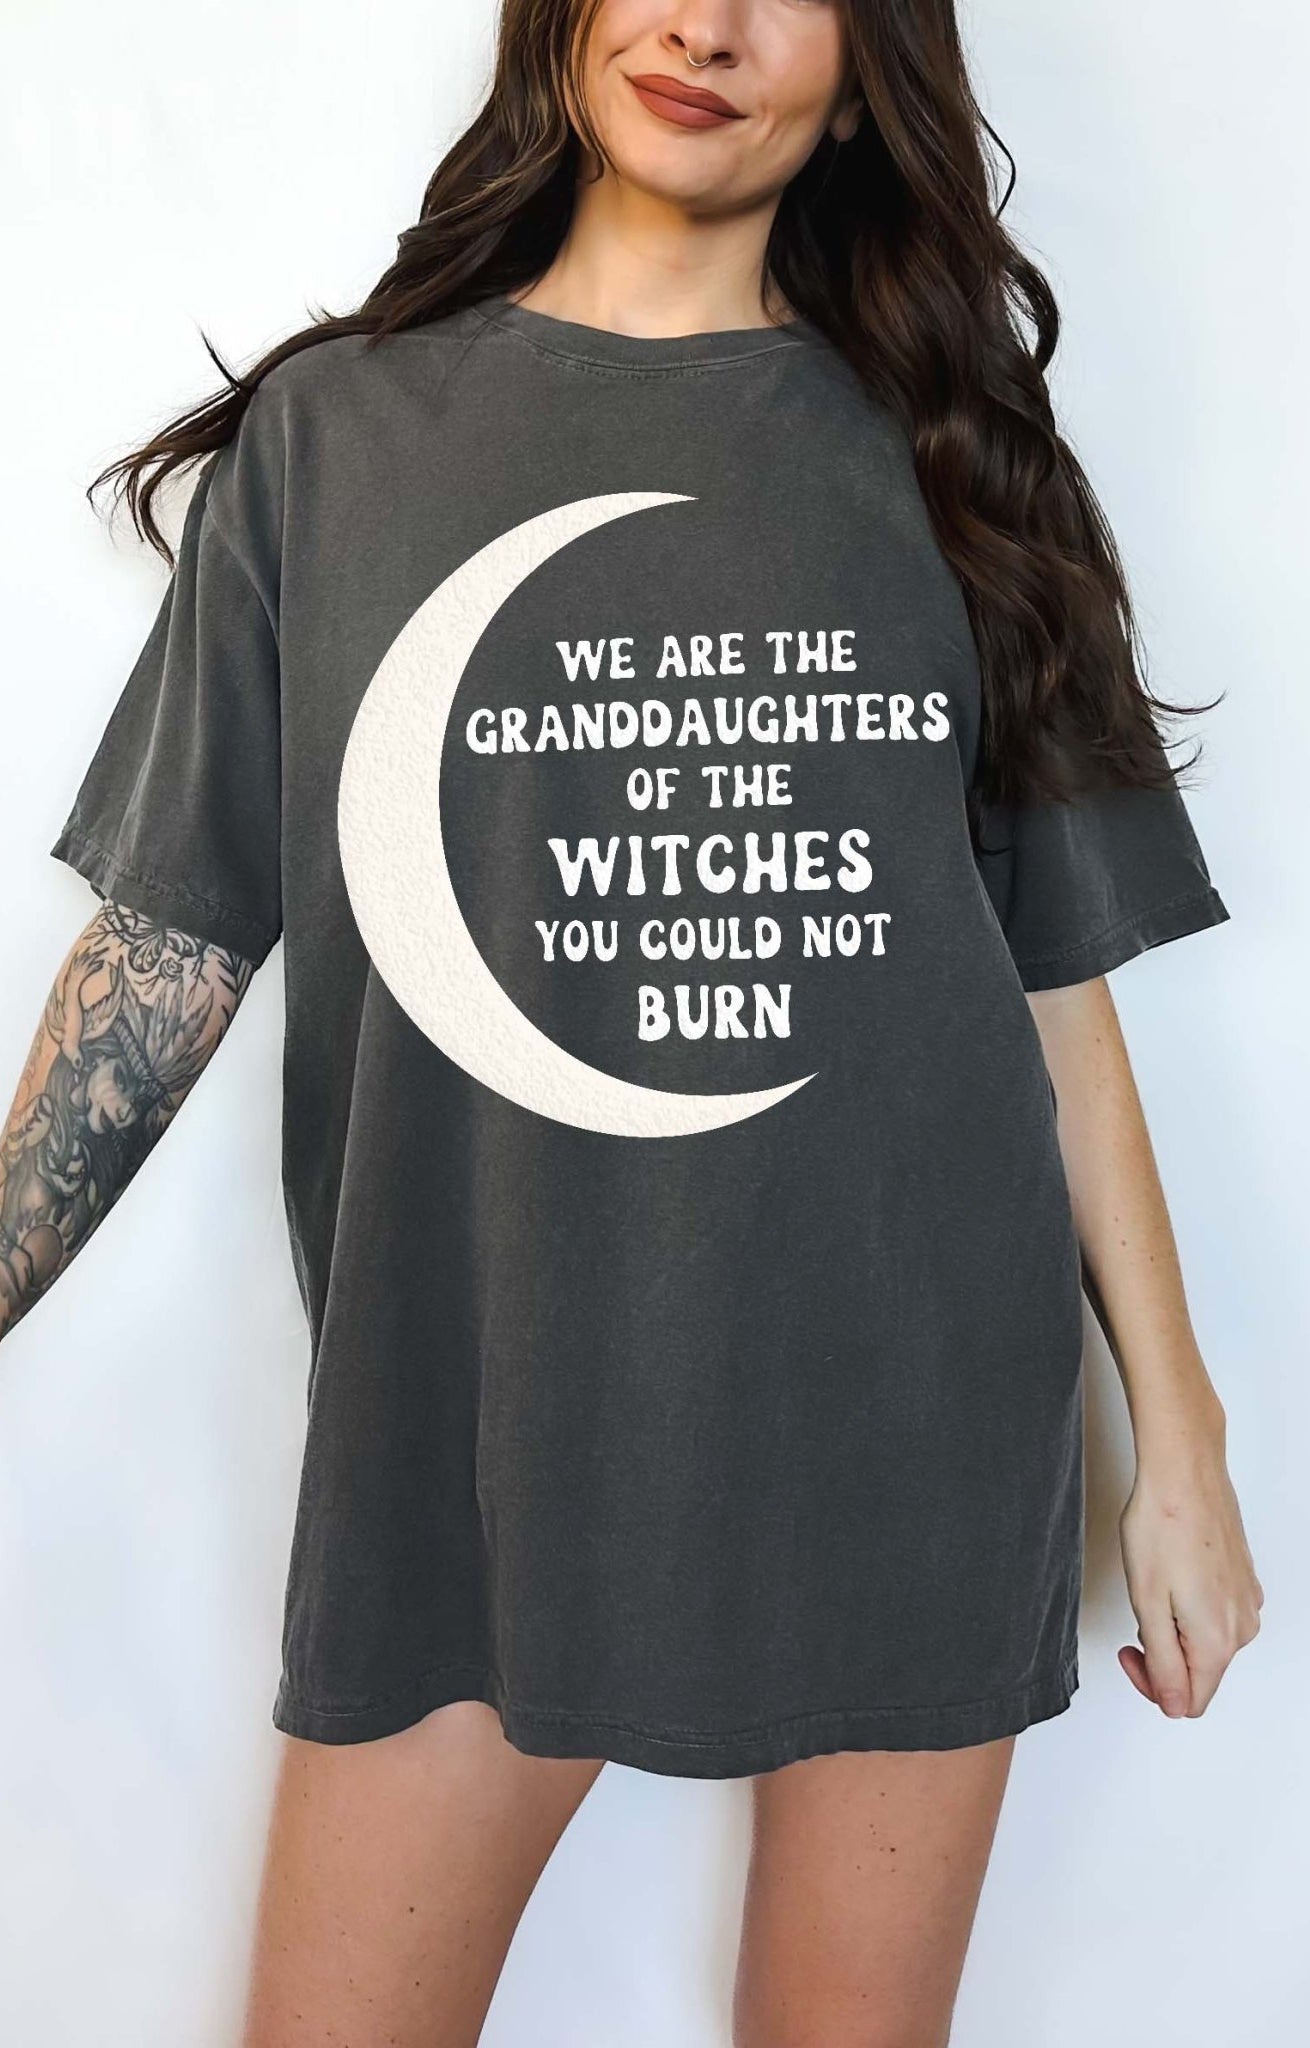 We Are The Granddaughters Of The Witches You Could Not Burn Tee - UntamedEgo LLC.